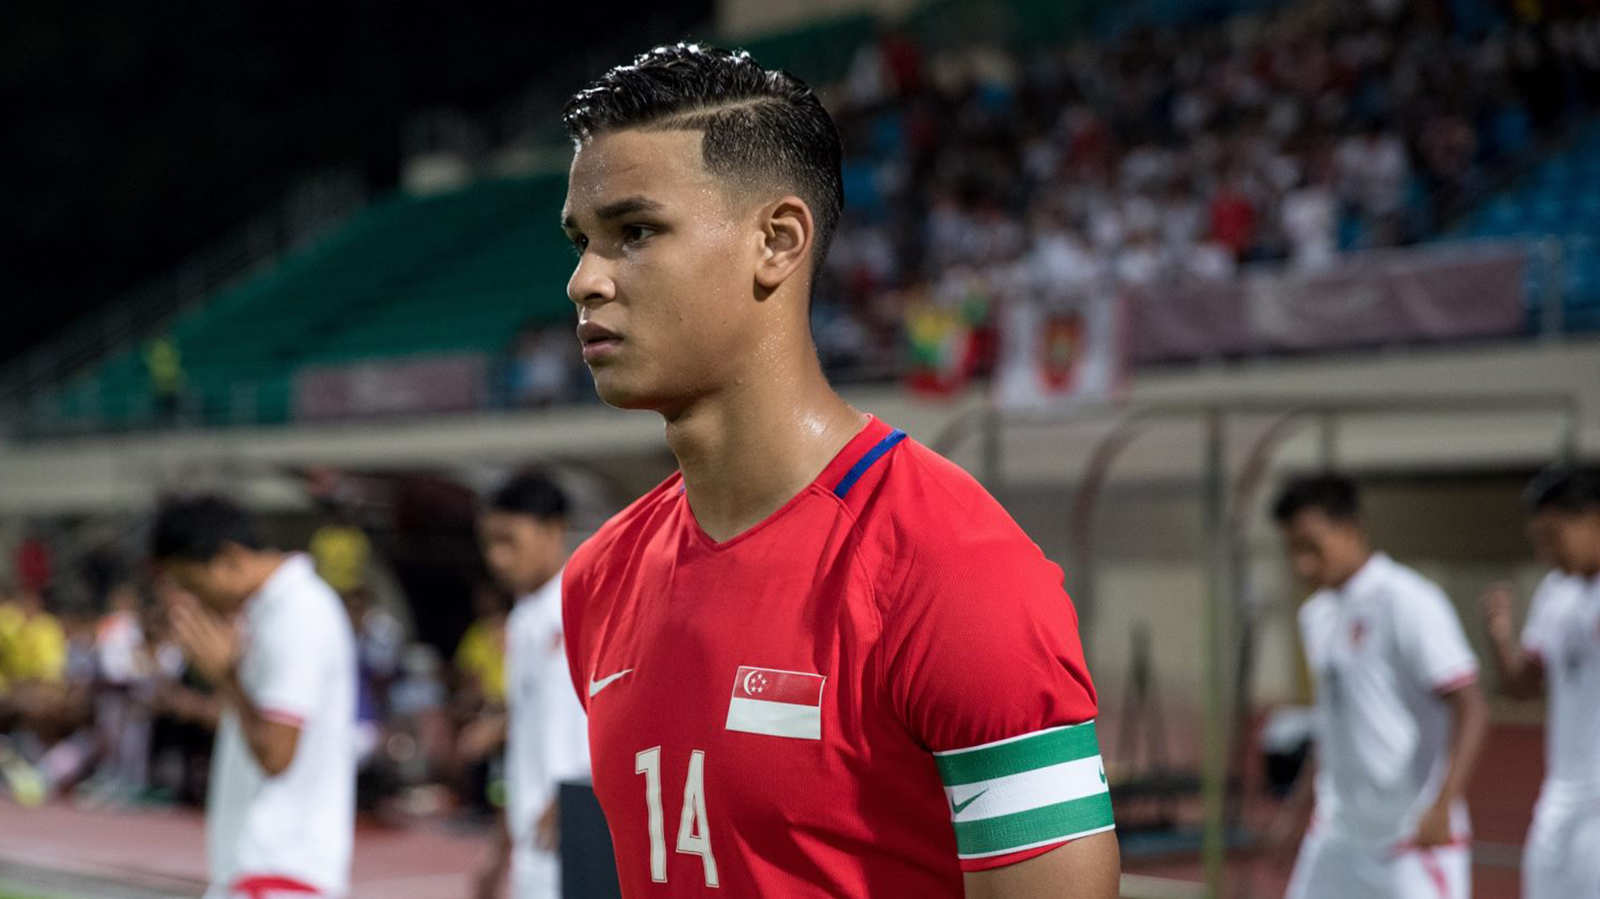 So what if Irfan Fandi rejected Braga contract offer?